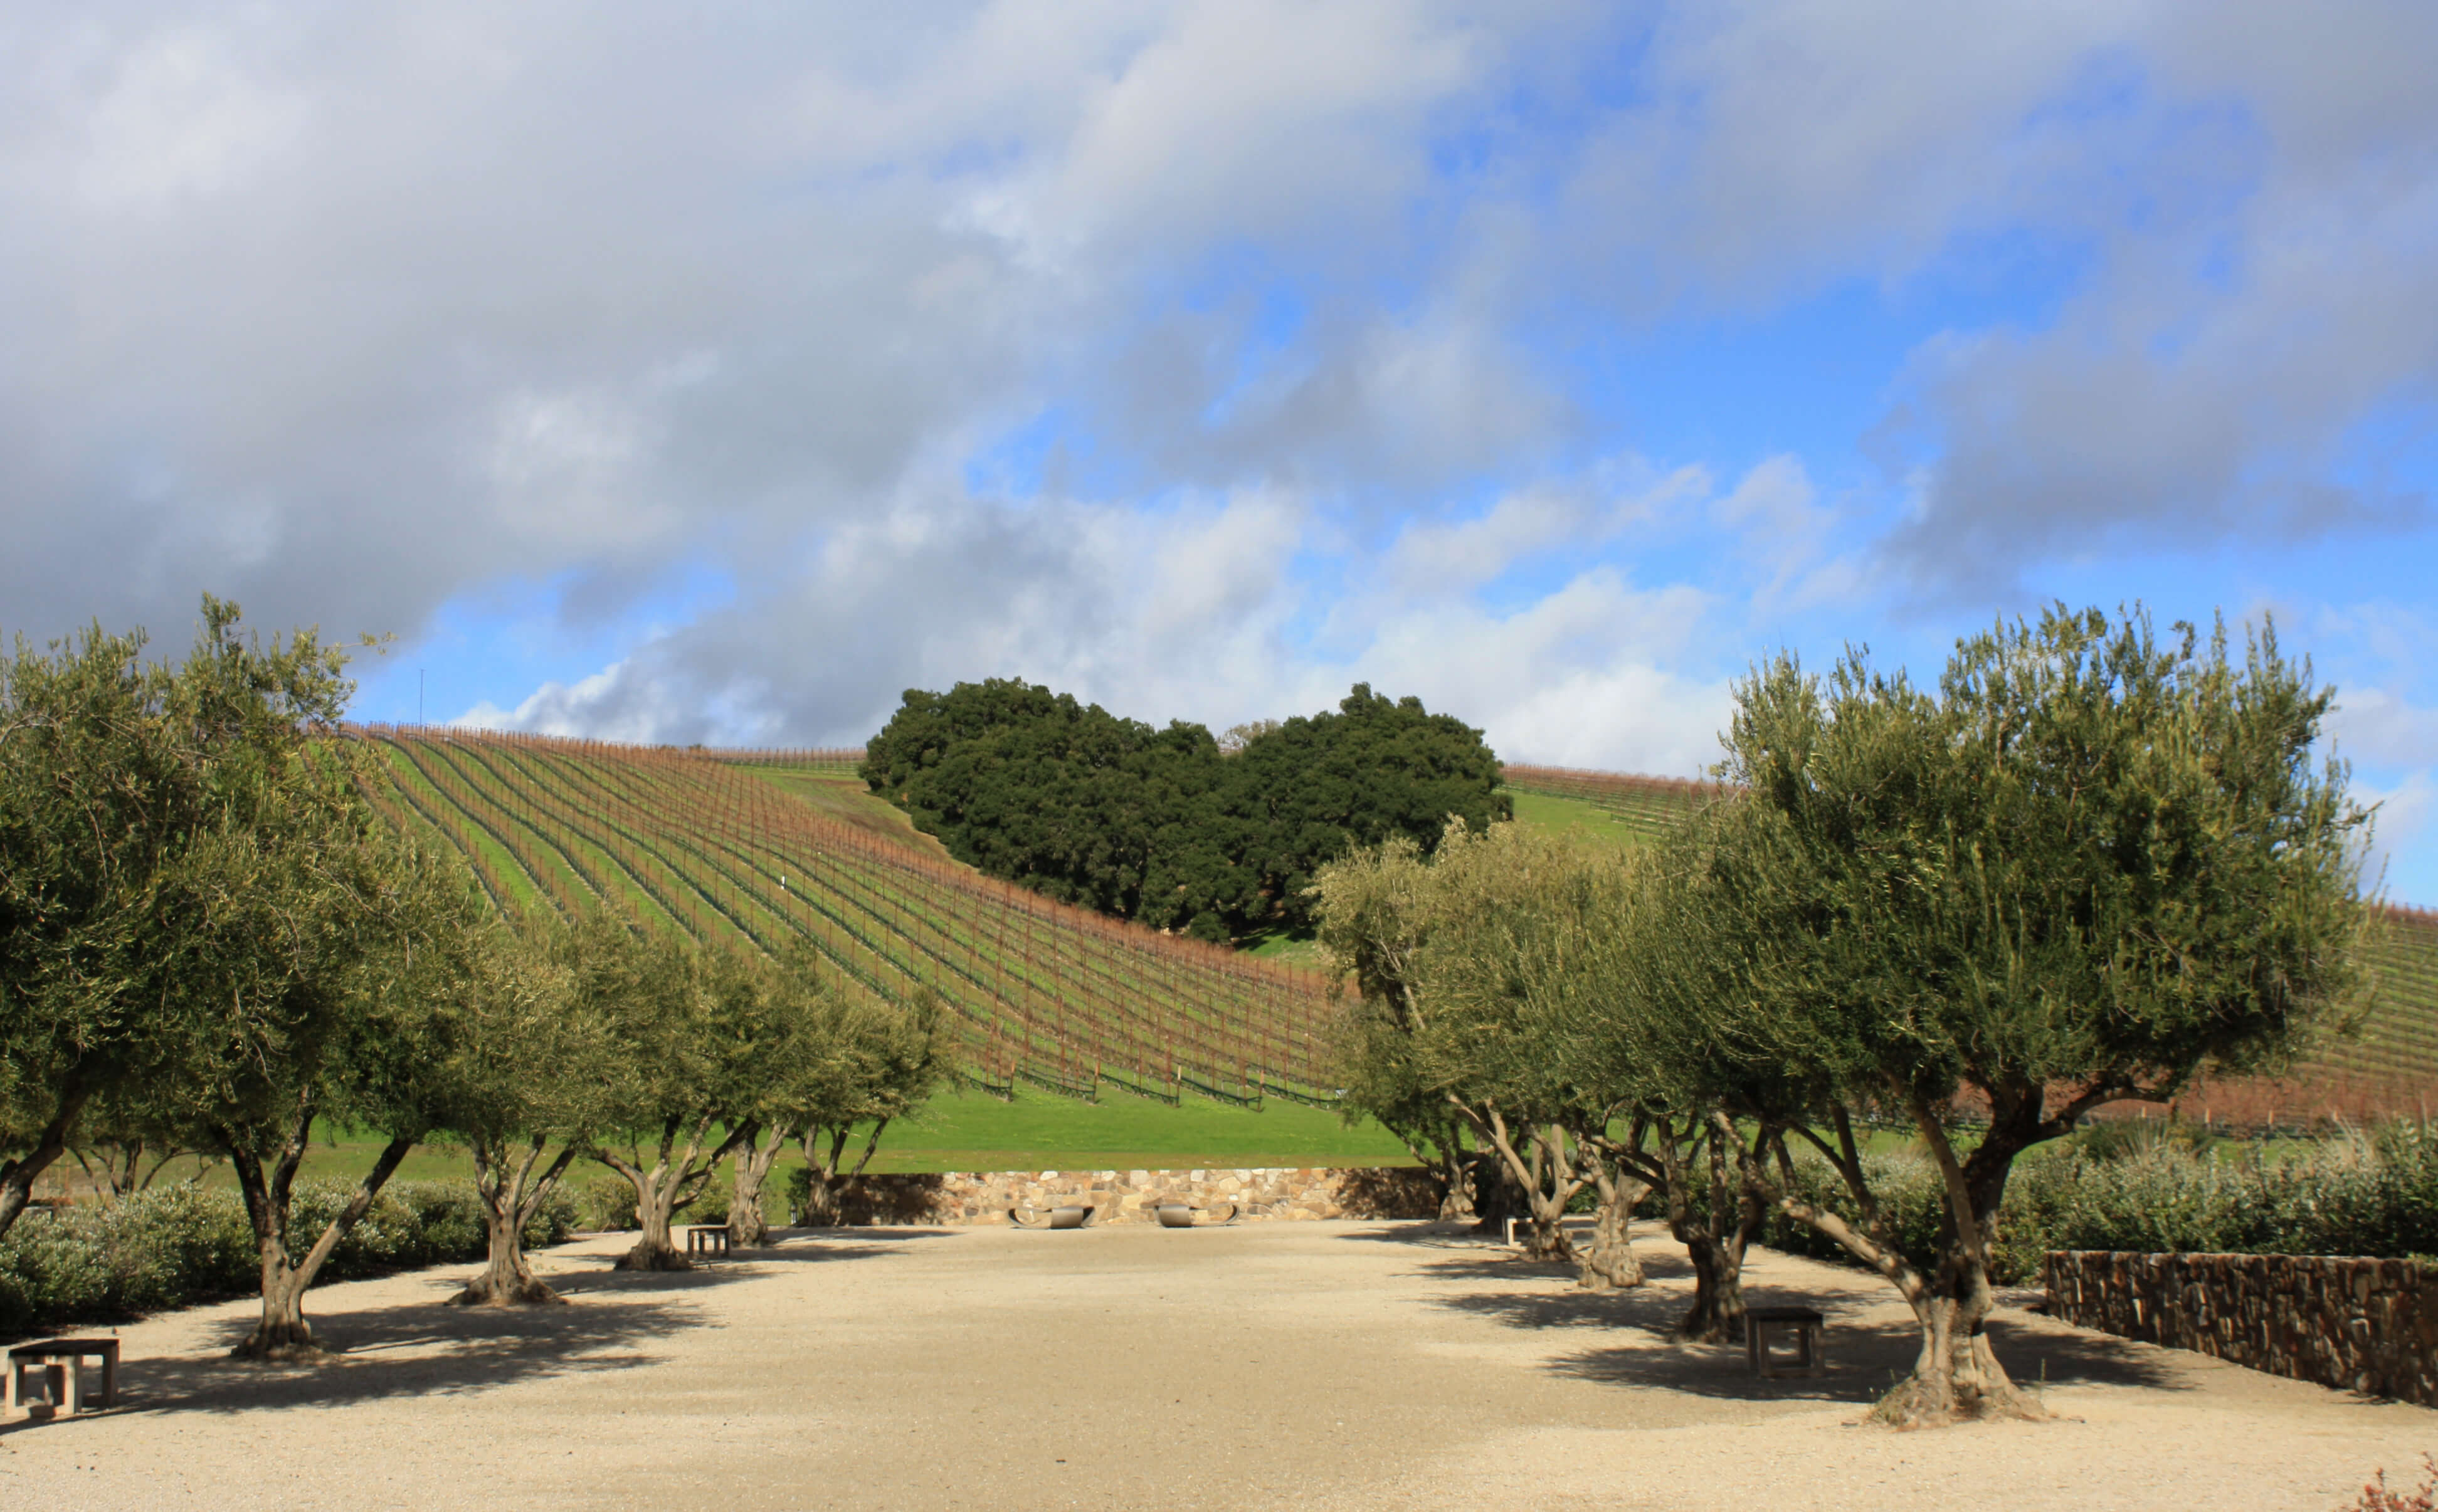 Clouds and blue skies at Heart Hill Vineyard